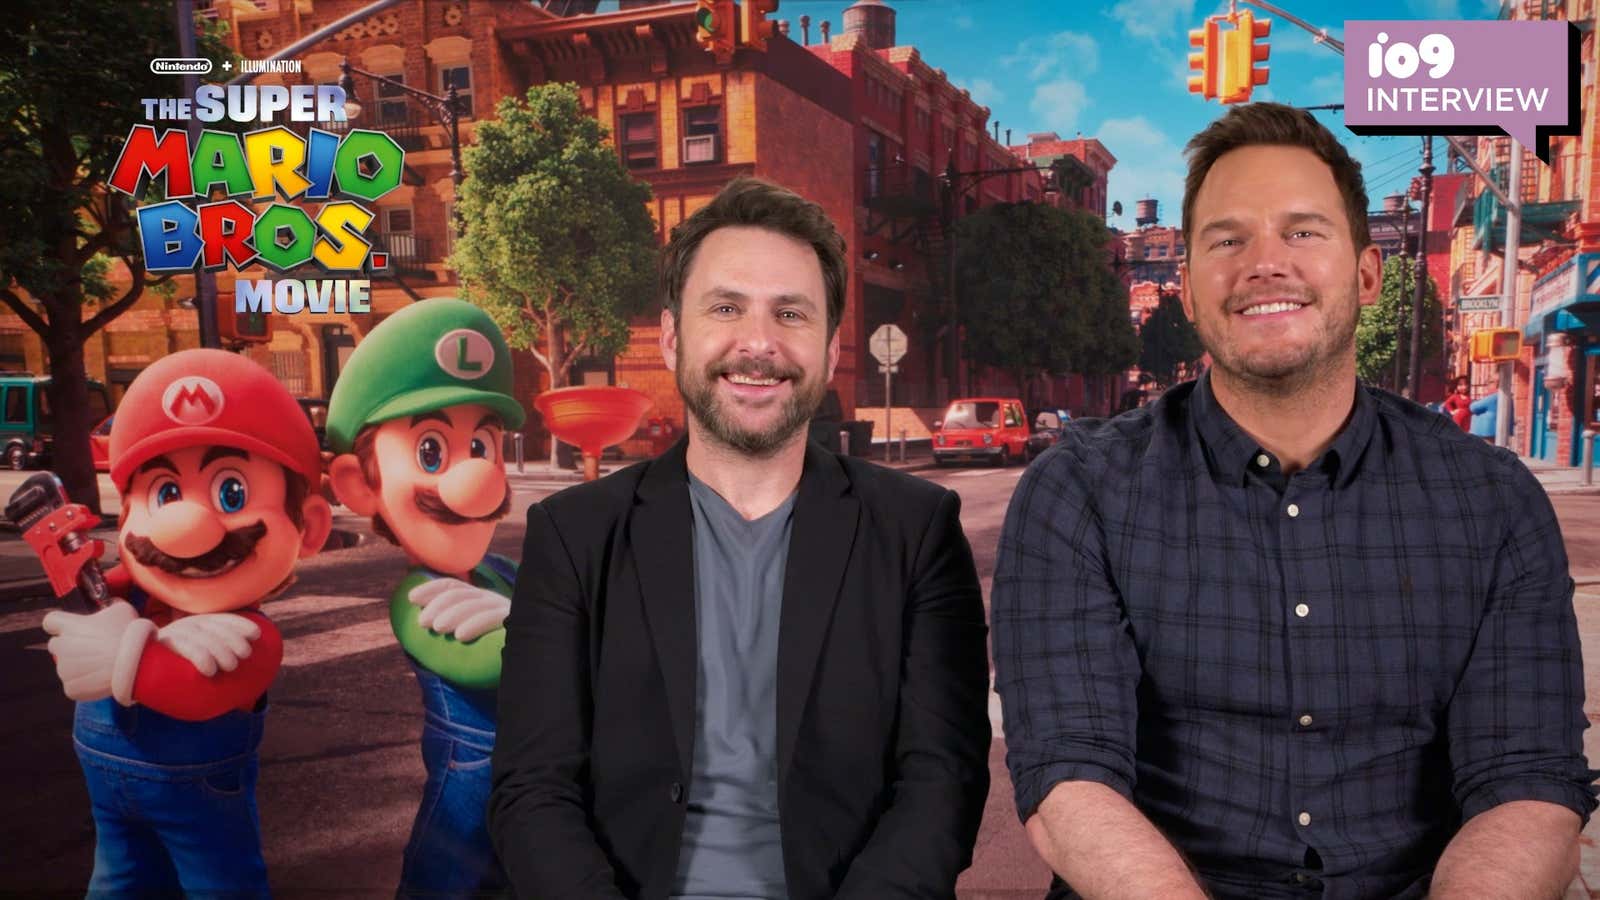 Charlie Day and Chris Pratt talk with io9 about The Super Mario Bros. Movie.